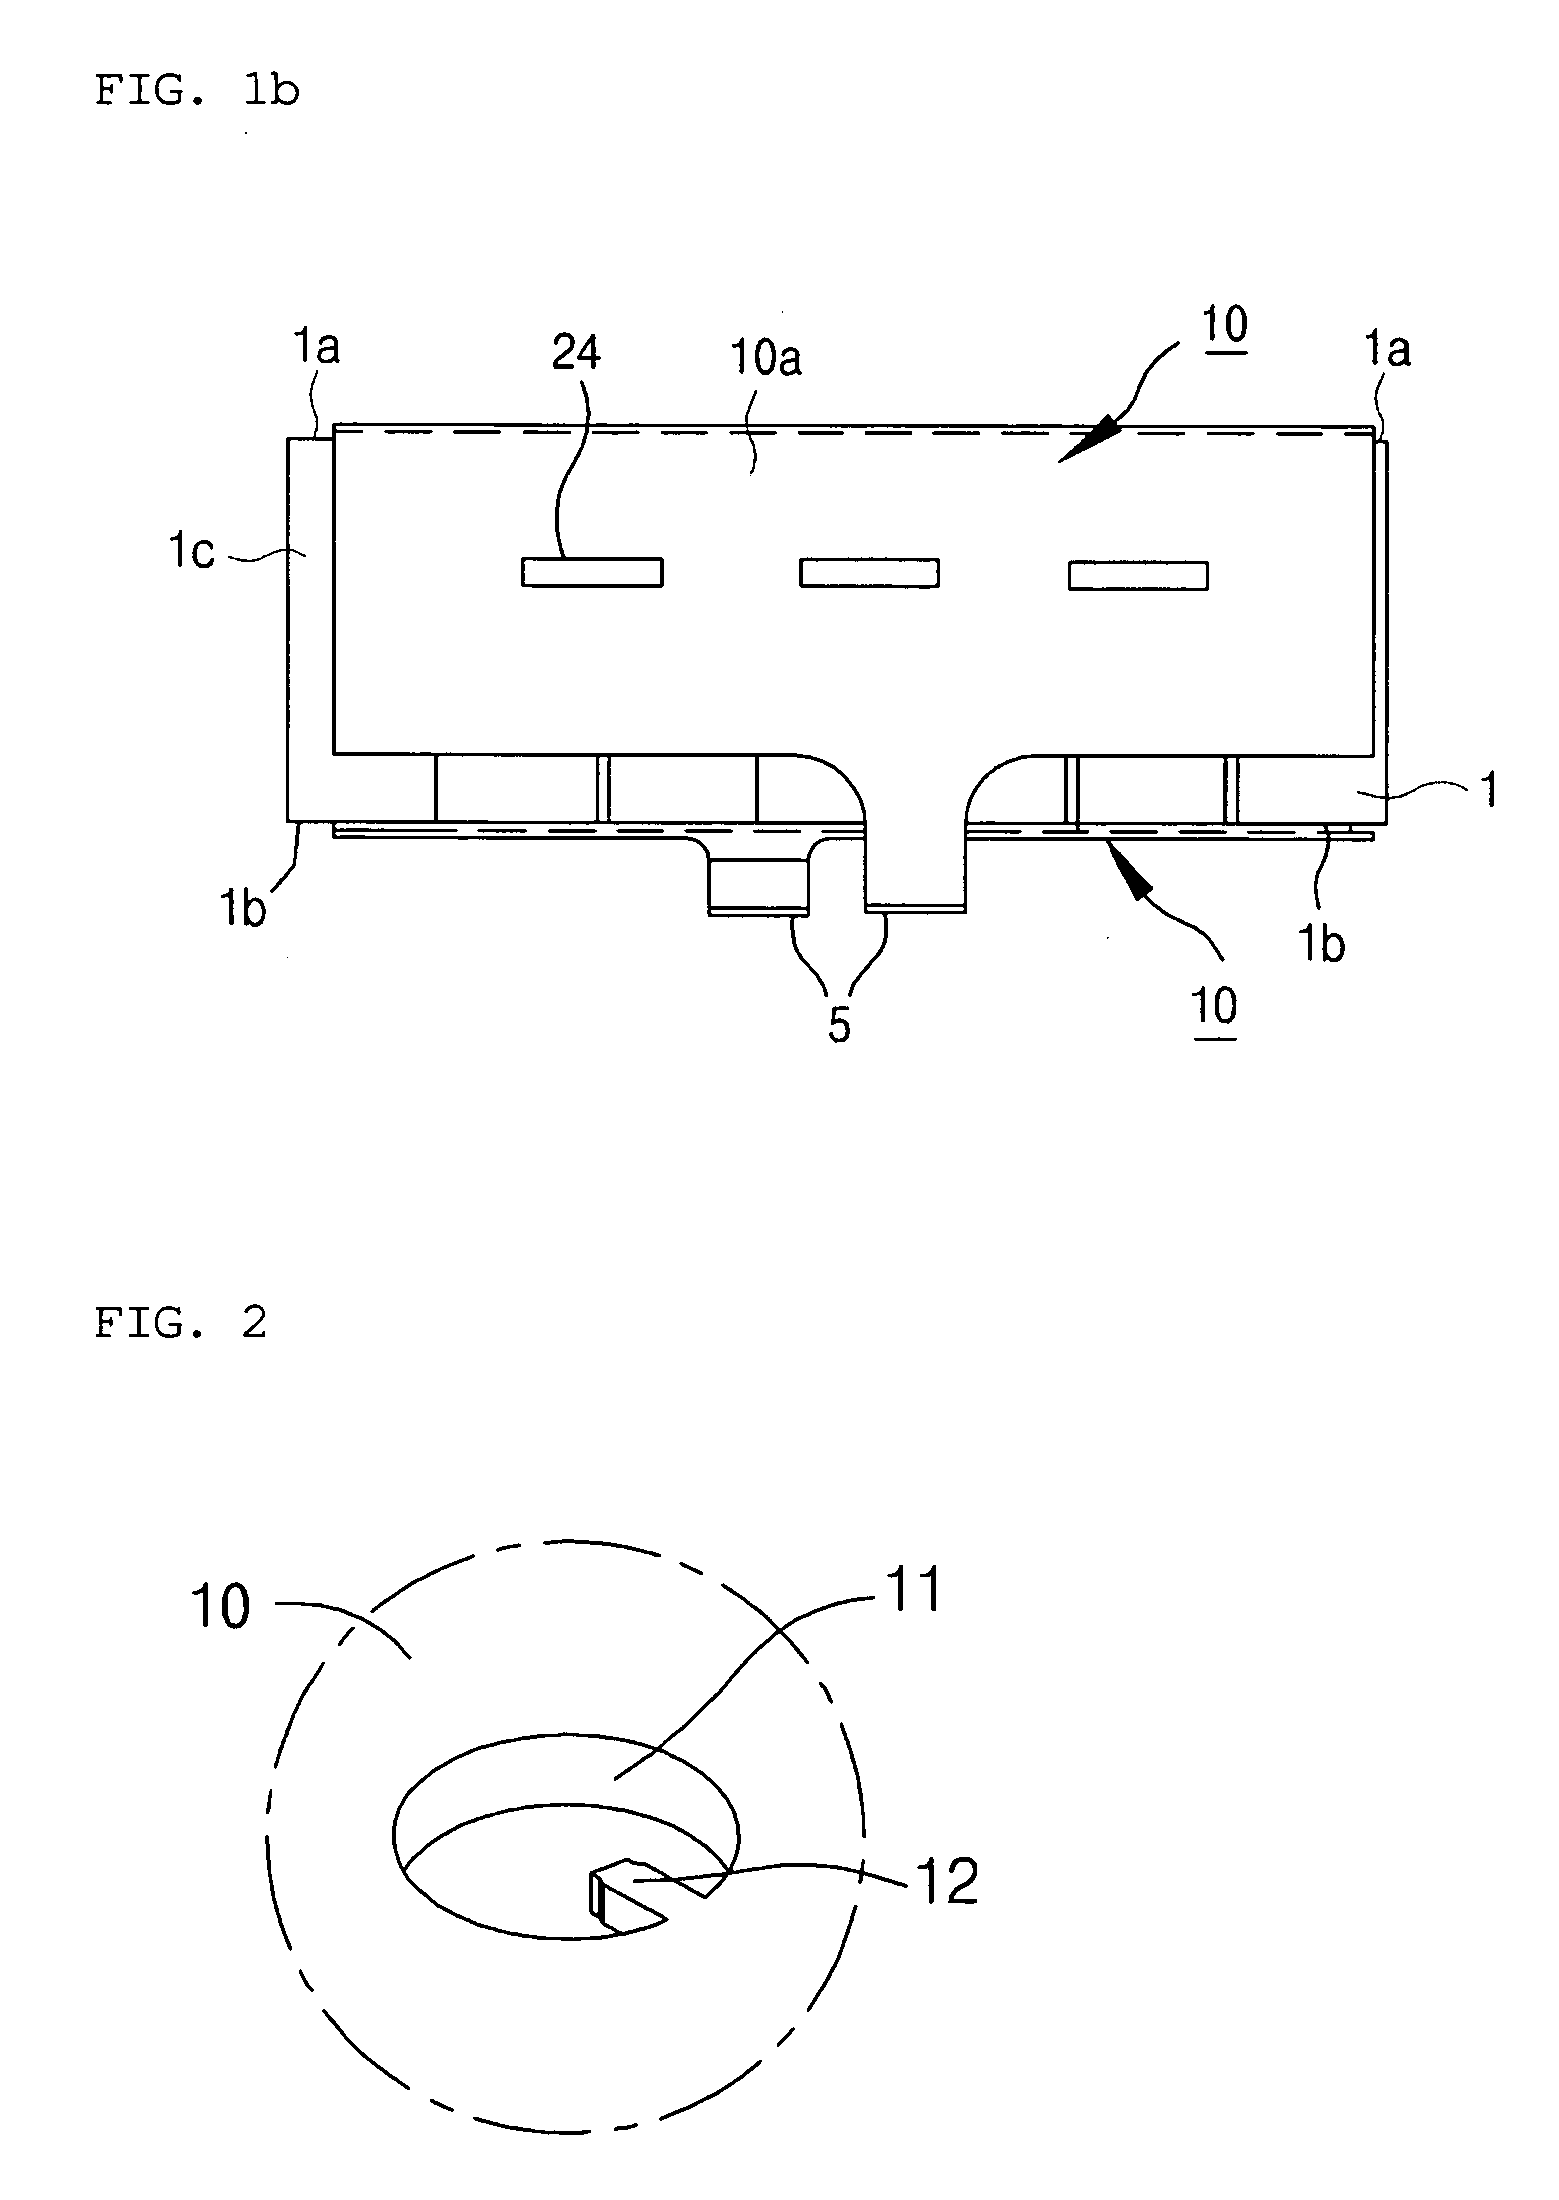 Bus-bar for jointing capacitor